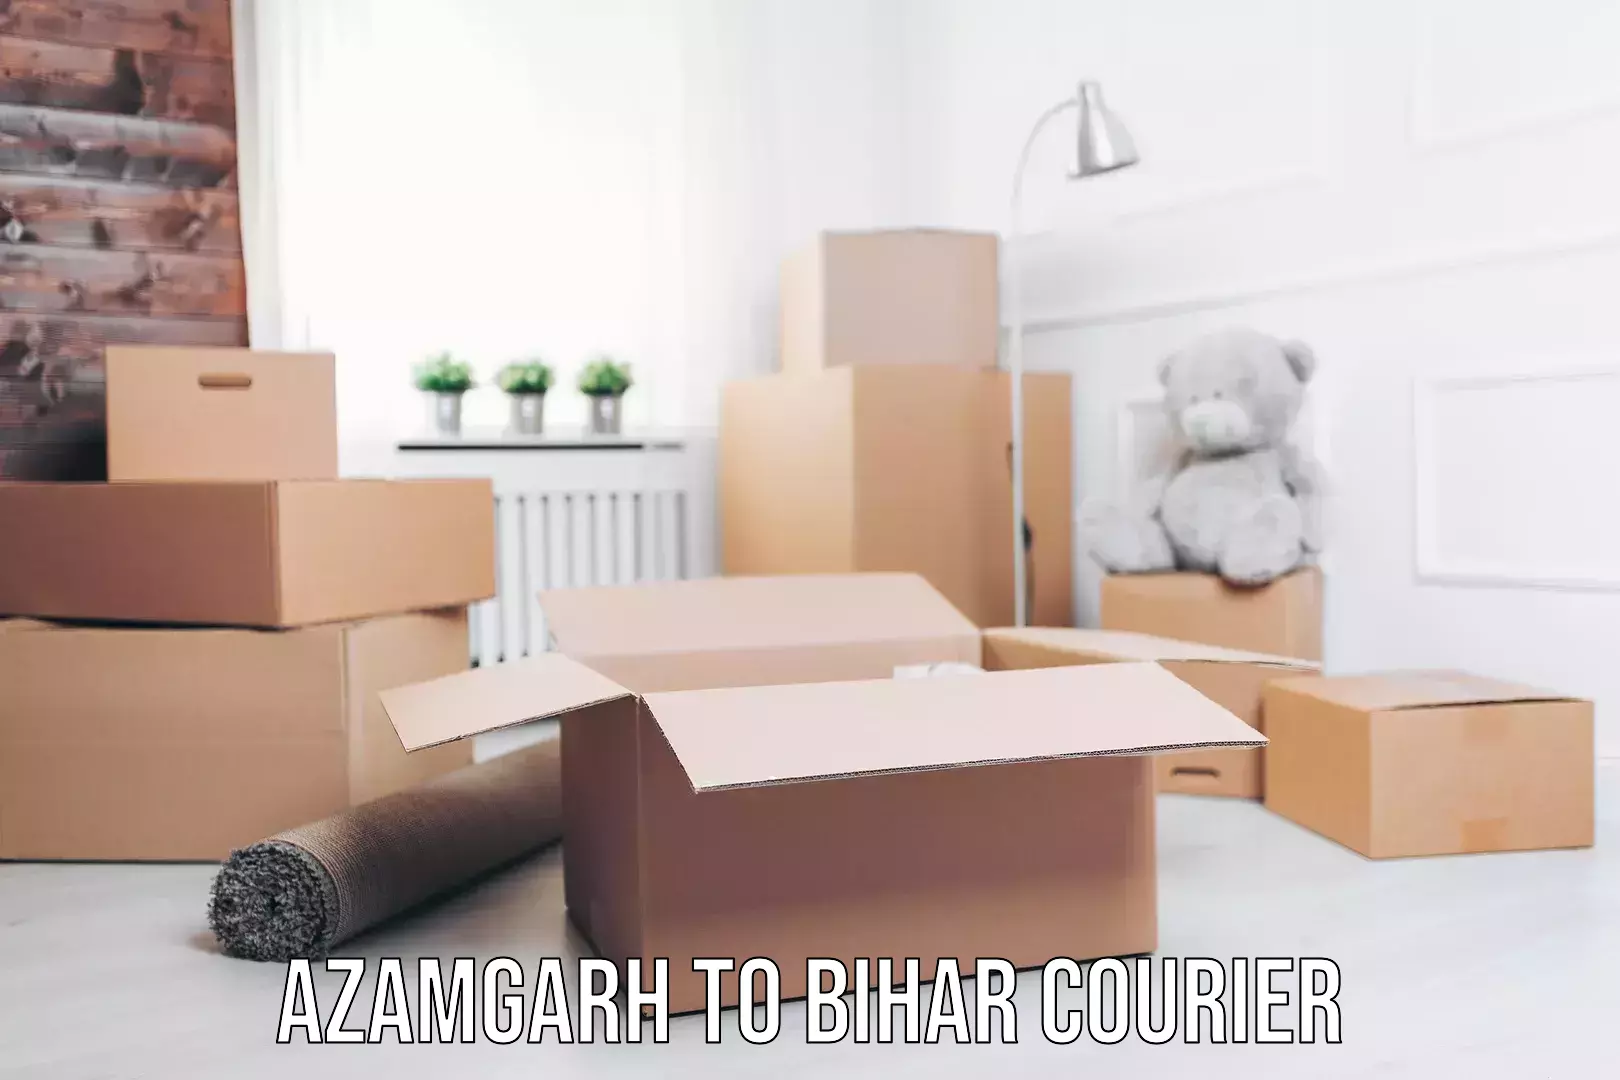 User-friendly delivery service Azamgarh to Bihar